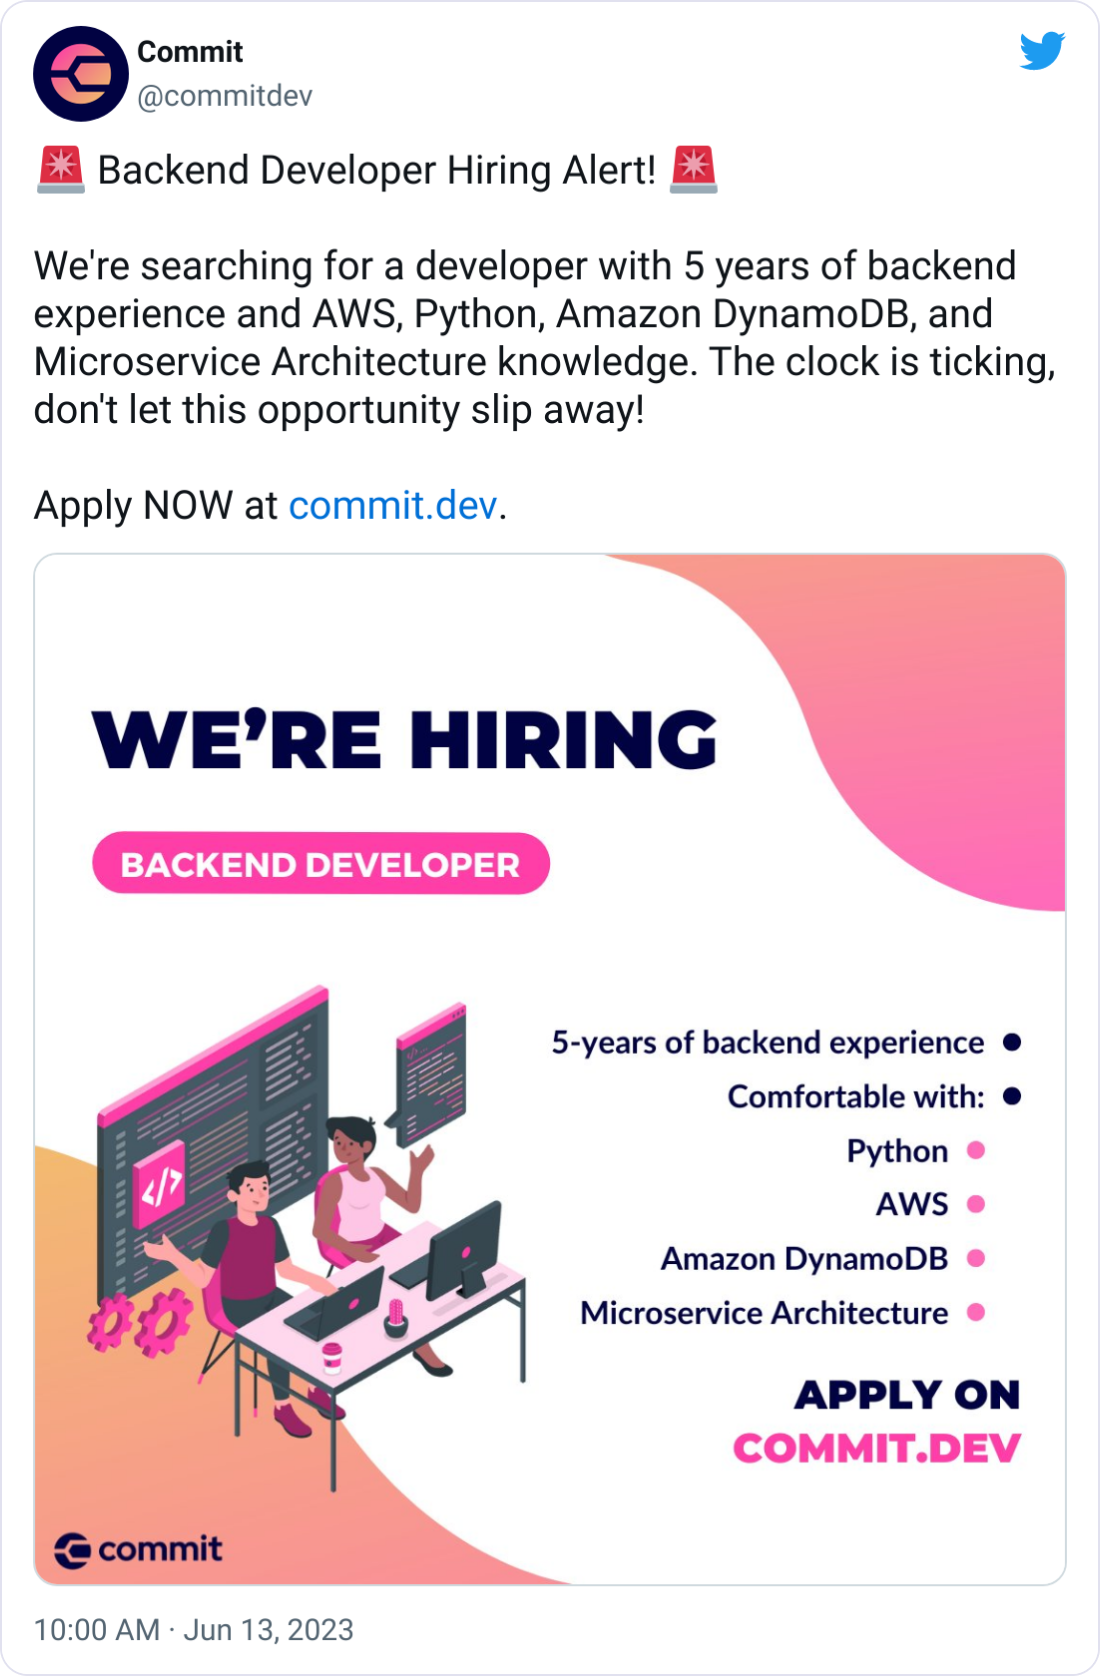  Commit @commitdev 🚨 Backend Developer Hiring Alert! 🚨  We're searching for a developer with 5 years of backend experience and AWS, Python, Amazon DynamoDB, and Microservice Architecture knowledge. The clock is ticking, don't let this opportunity slip away!  Apply NOW at https://commit.dev.